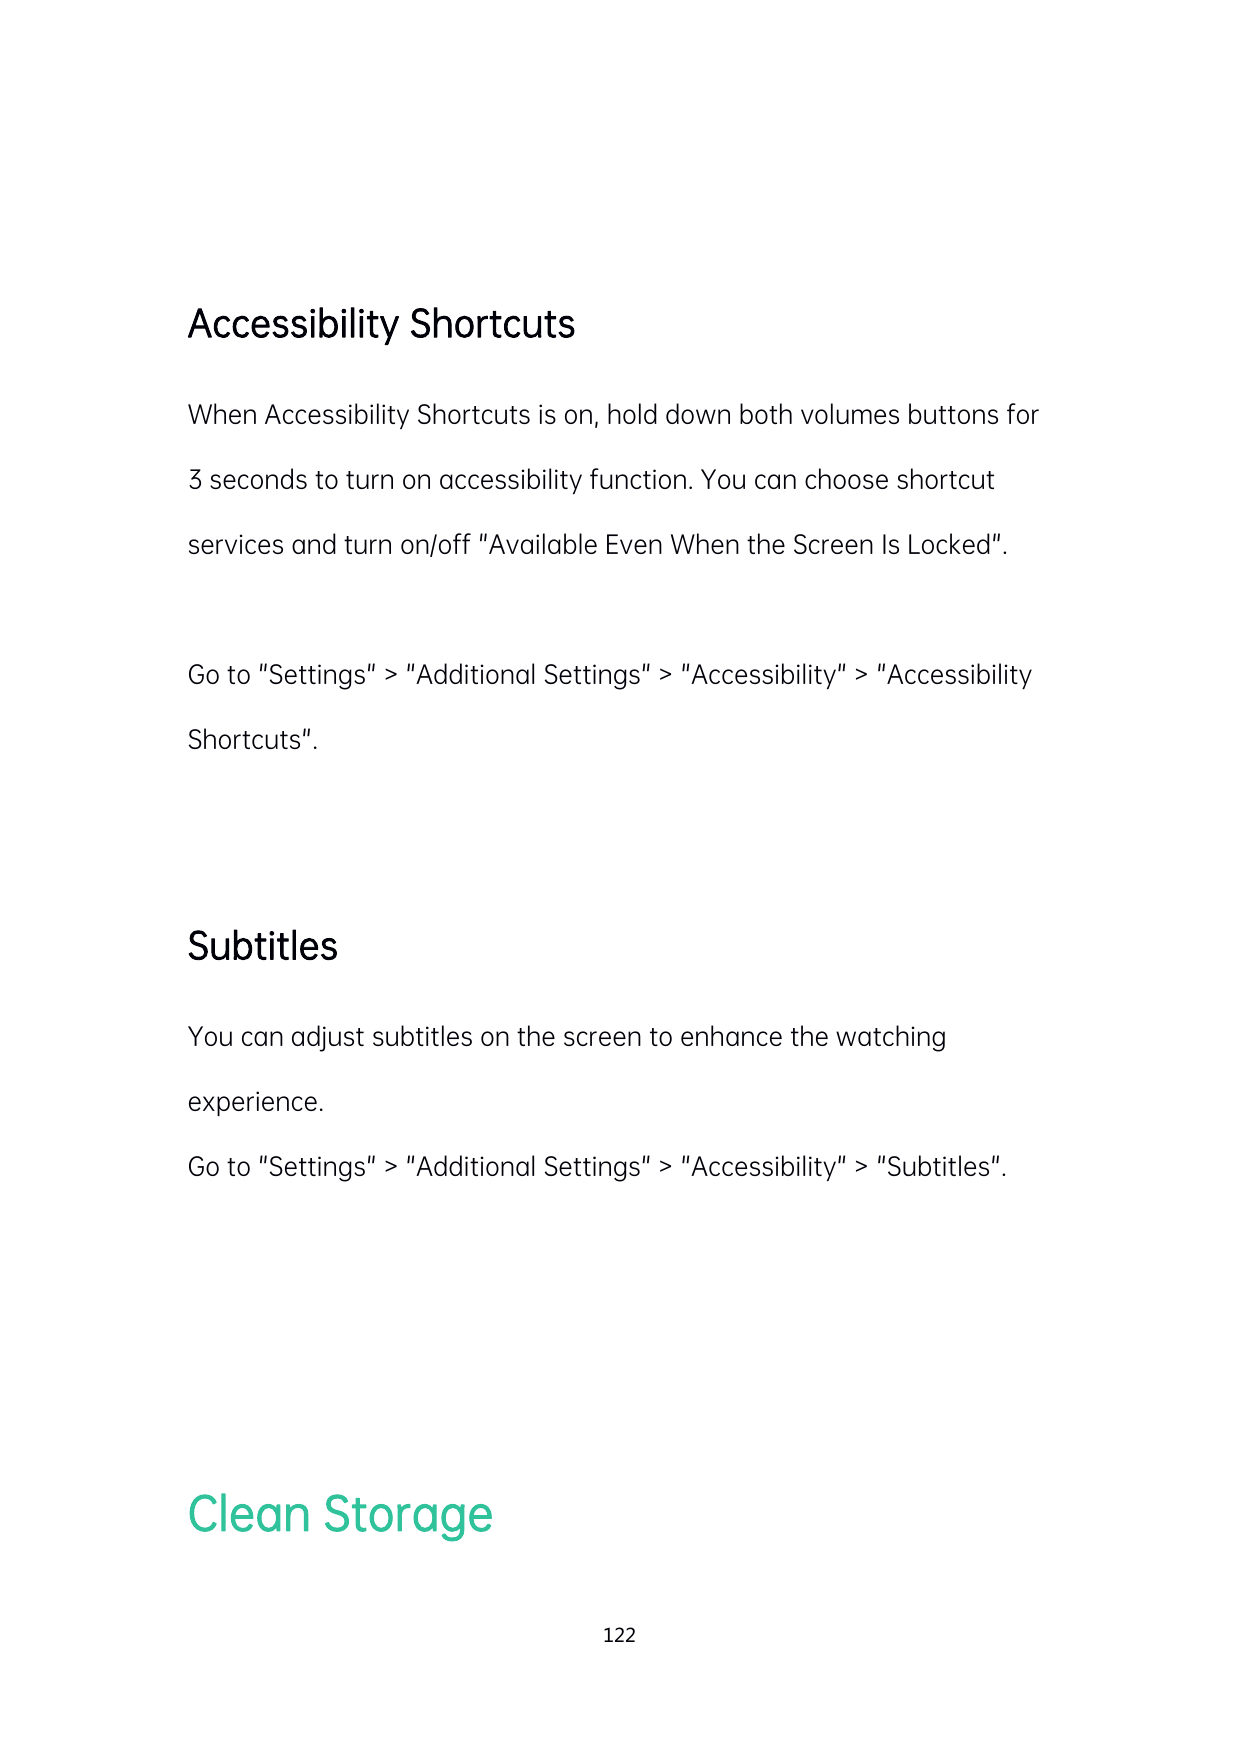 Accessibility ShortcutsWhen Accessibility Shortcuts is on, hold down both volumes buttons for3 seconds to turn on accessibility 